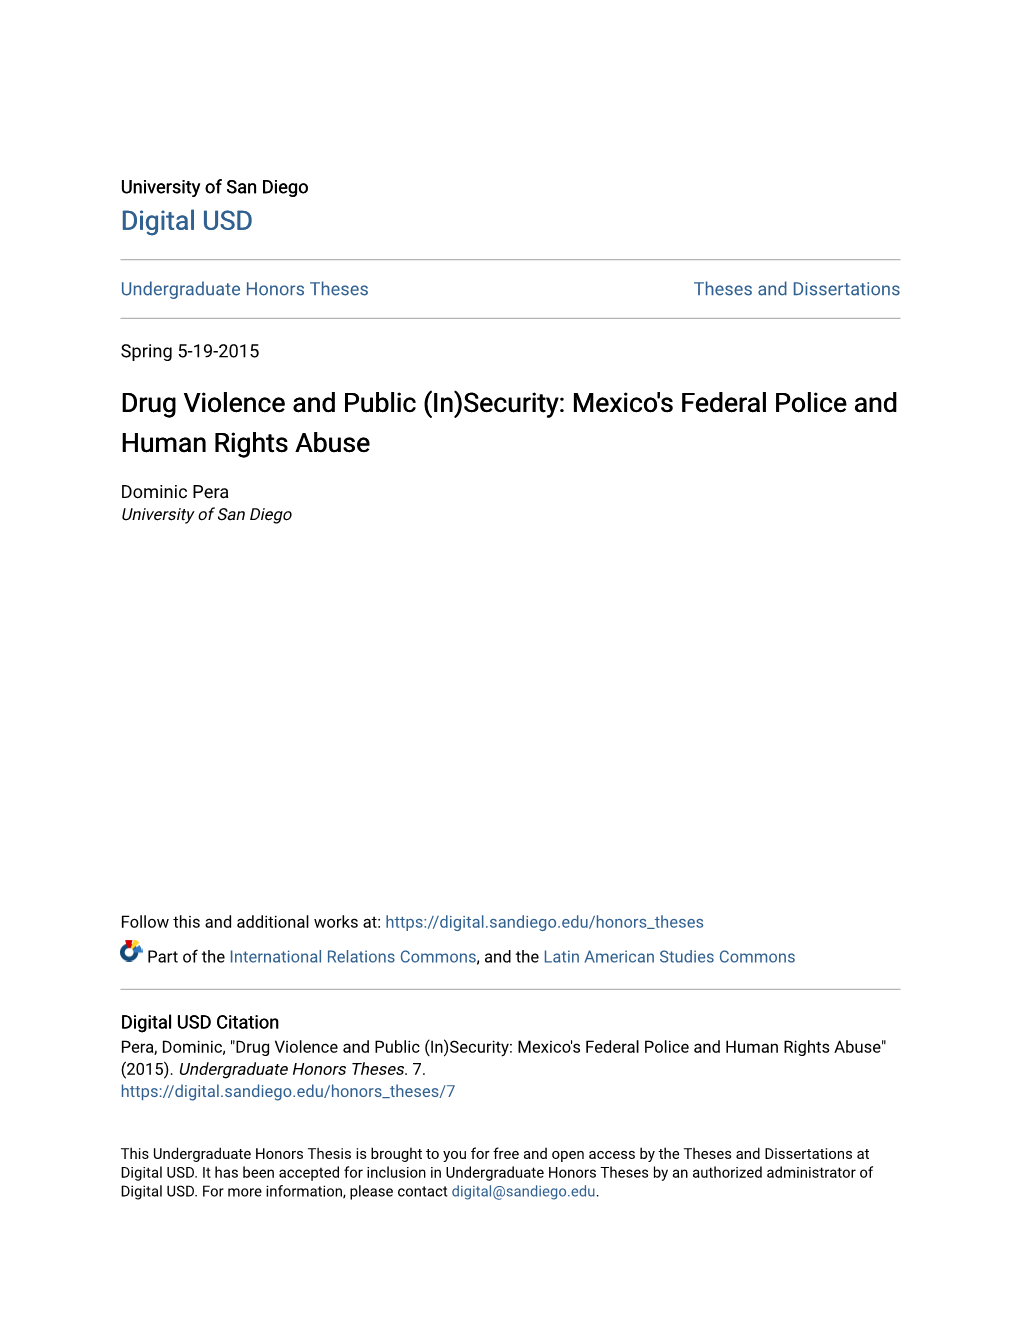 Drug Violence and Public (In)Security: Mexico's Federal Police and Human Rights Abuse